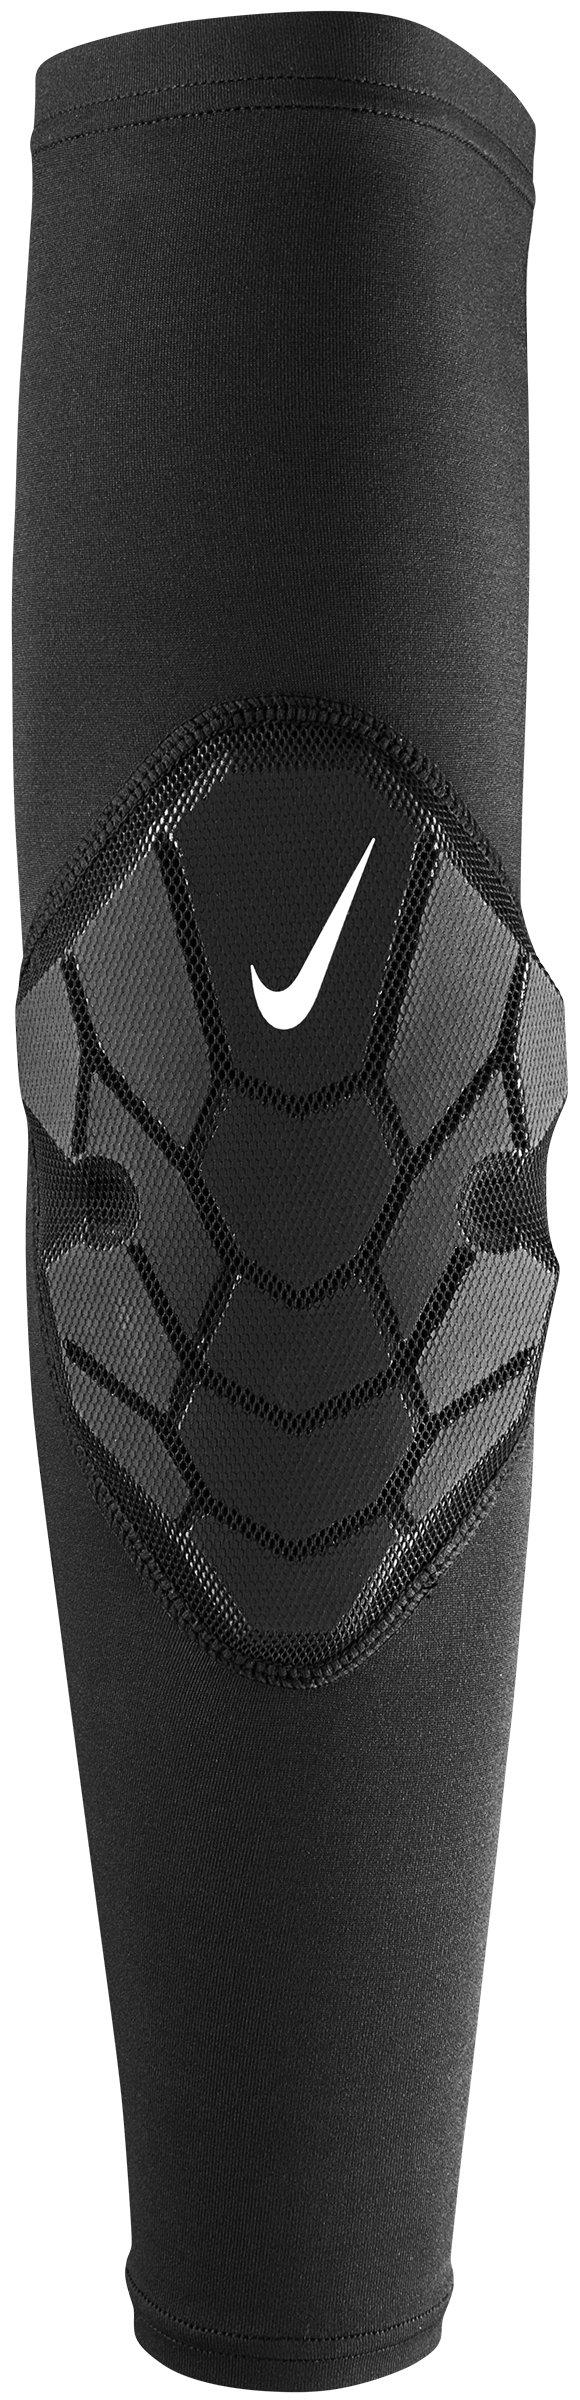 Pro Hyperstrong Padded Elbow Sleeve 3.0 from Nike